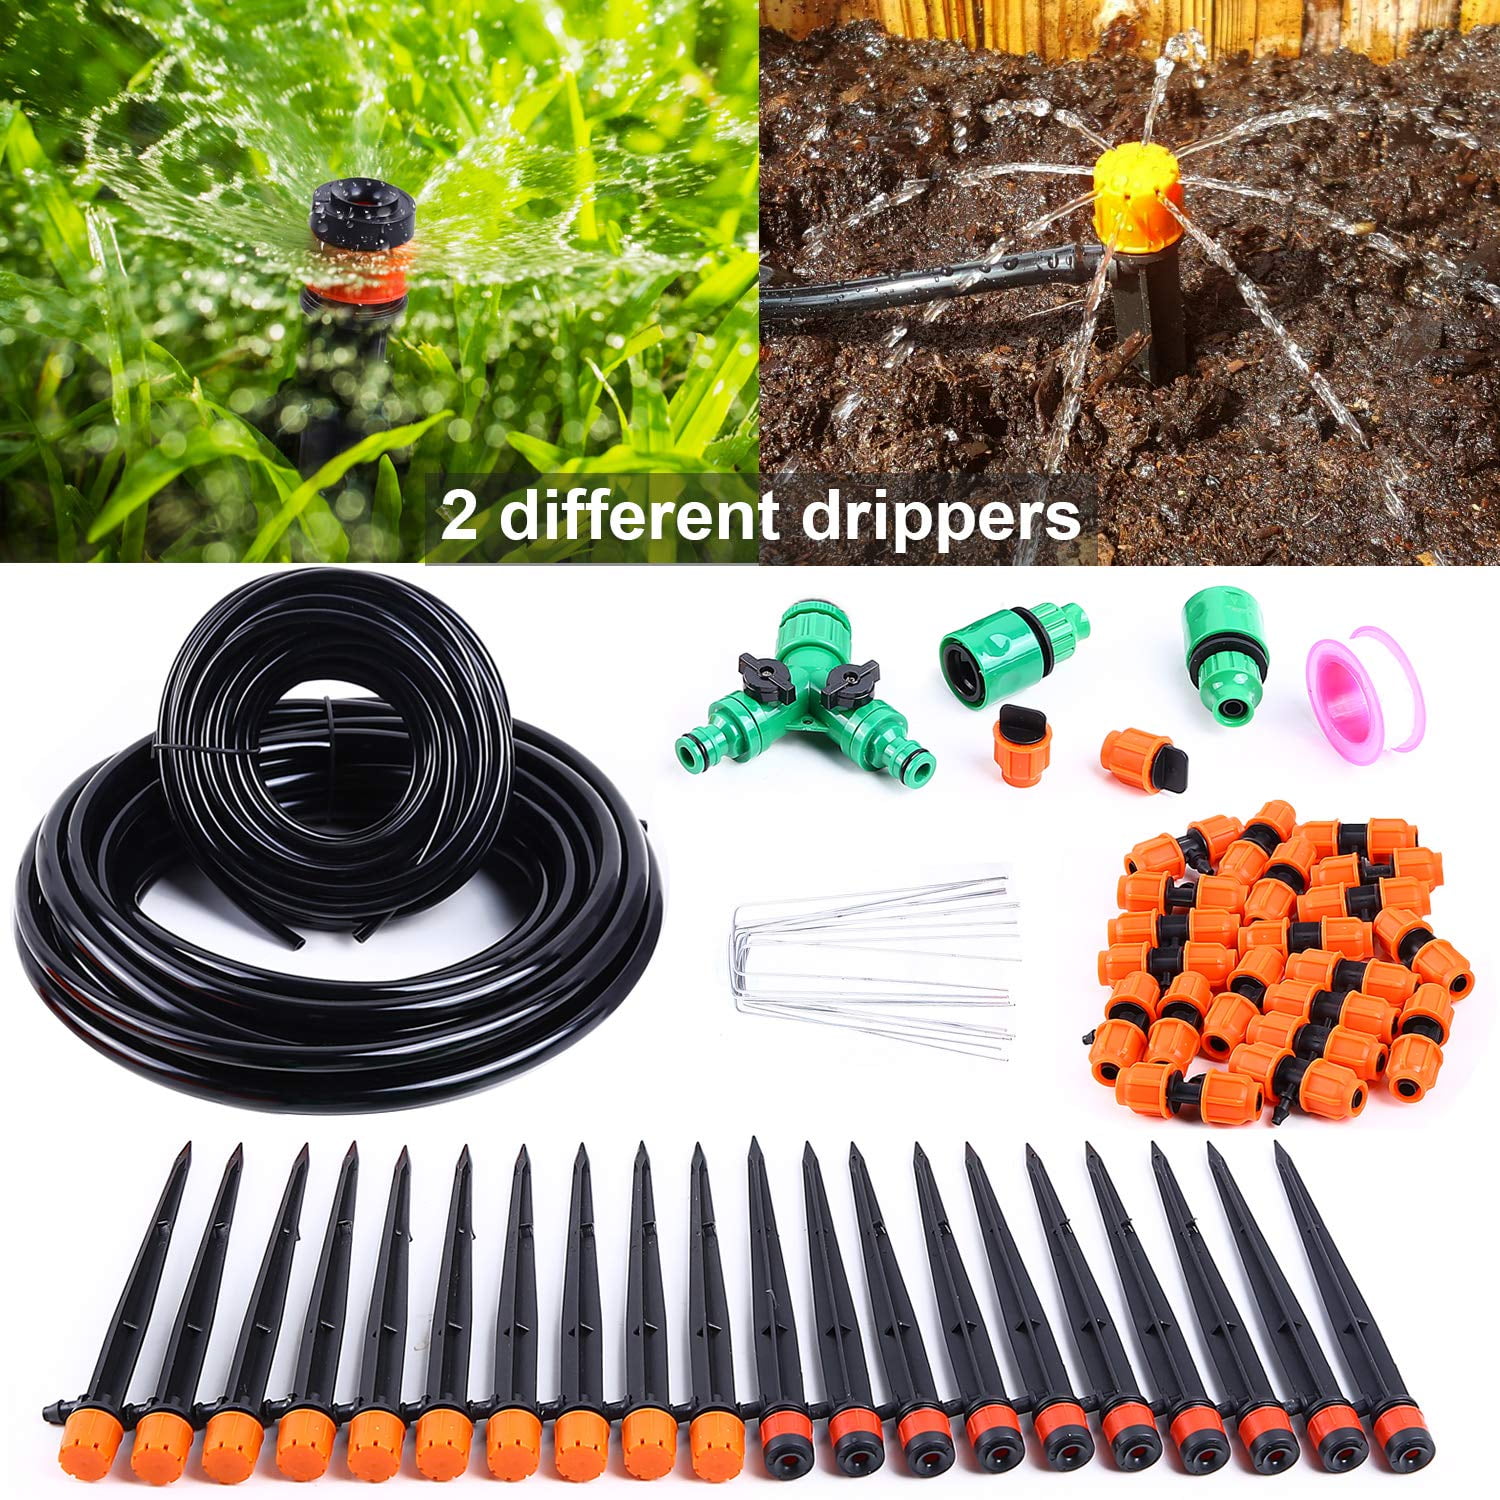 2 Different Drip Irrigation Emitters Drippers Flower Beds Pot Plants Ohuhu DIY Drip Irrigation Kit Plant Watering System 1/2 & 1/4 Heavy Duty Tube Water-Saving System for Garden Greenhouse 